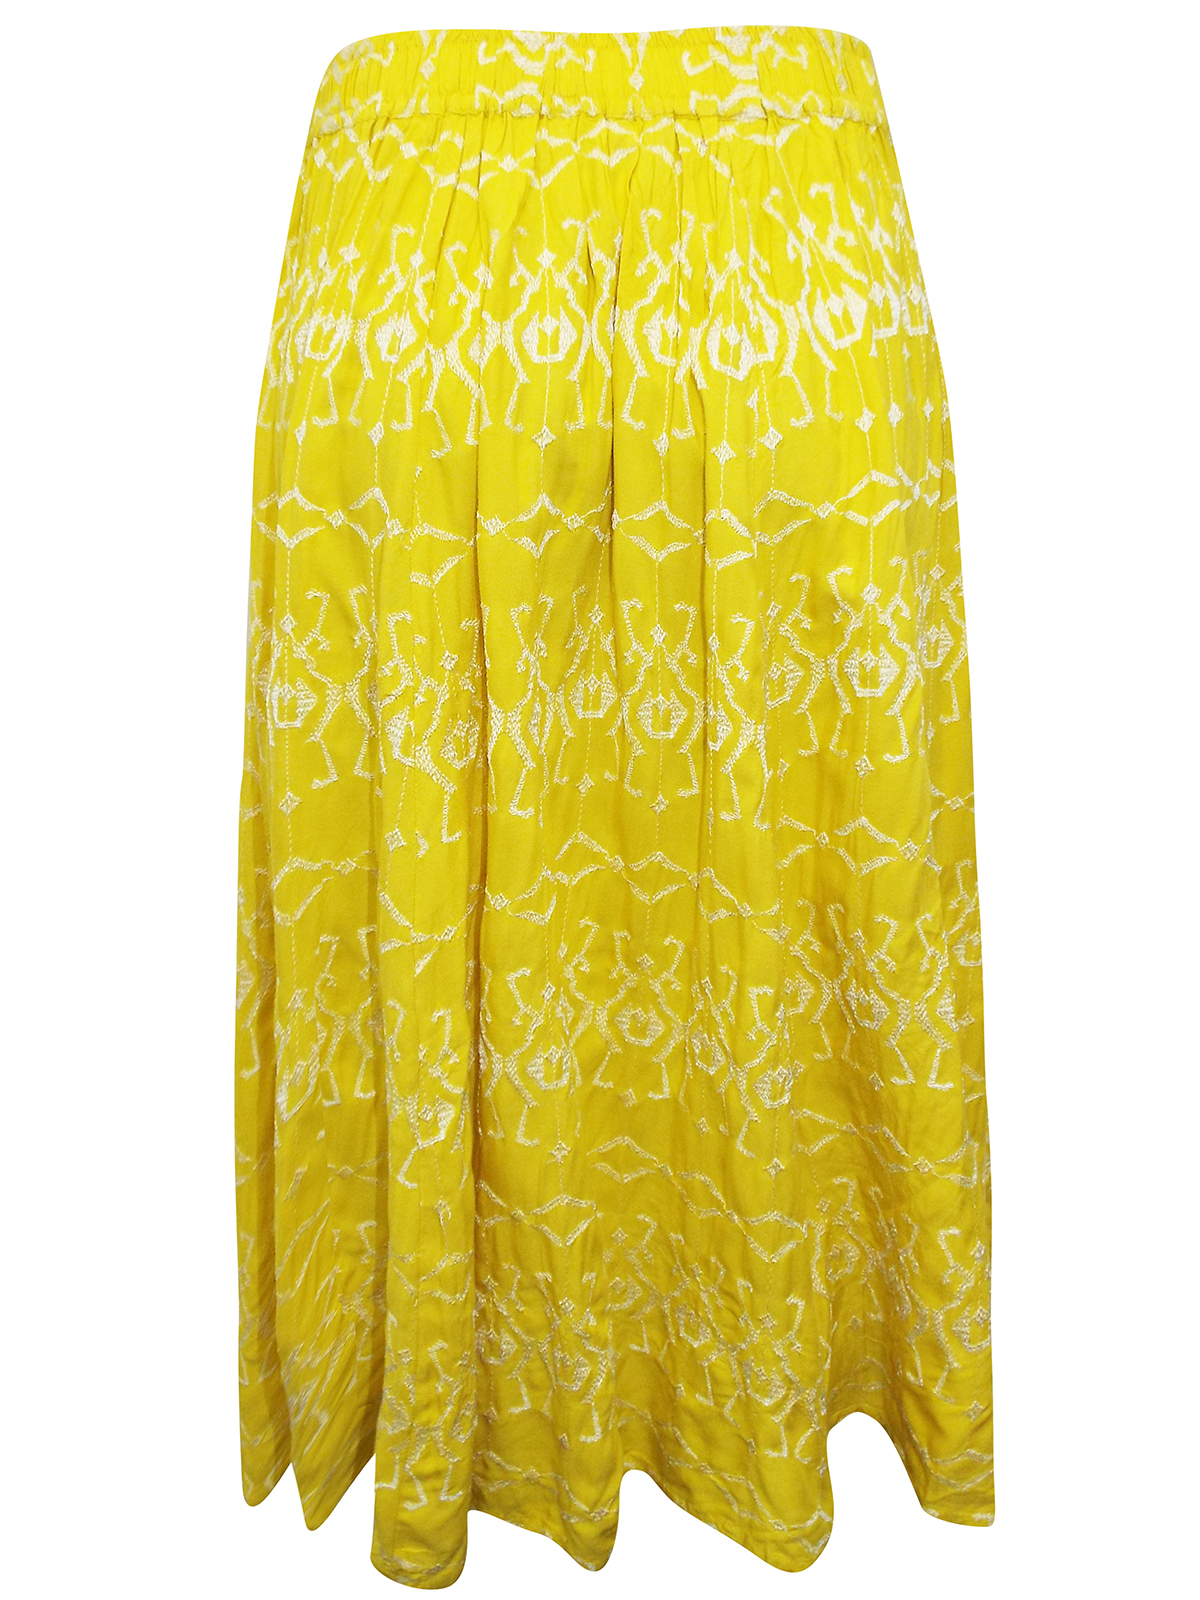 Marks and Spencer - - M&5 YELLOW Embroidered Full Midi Skirt - Size 10 ...